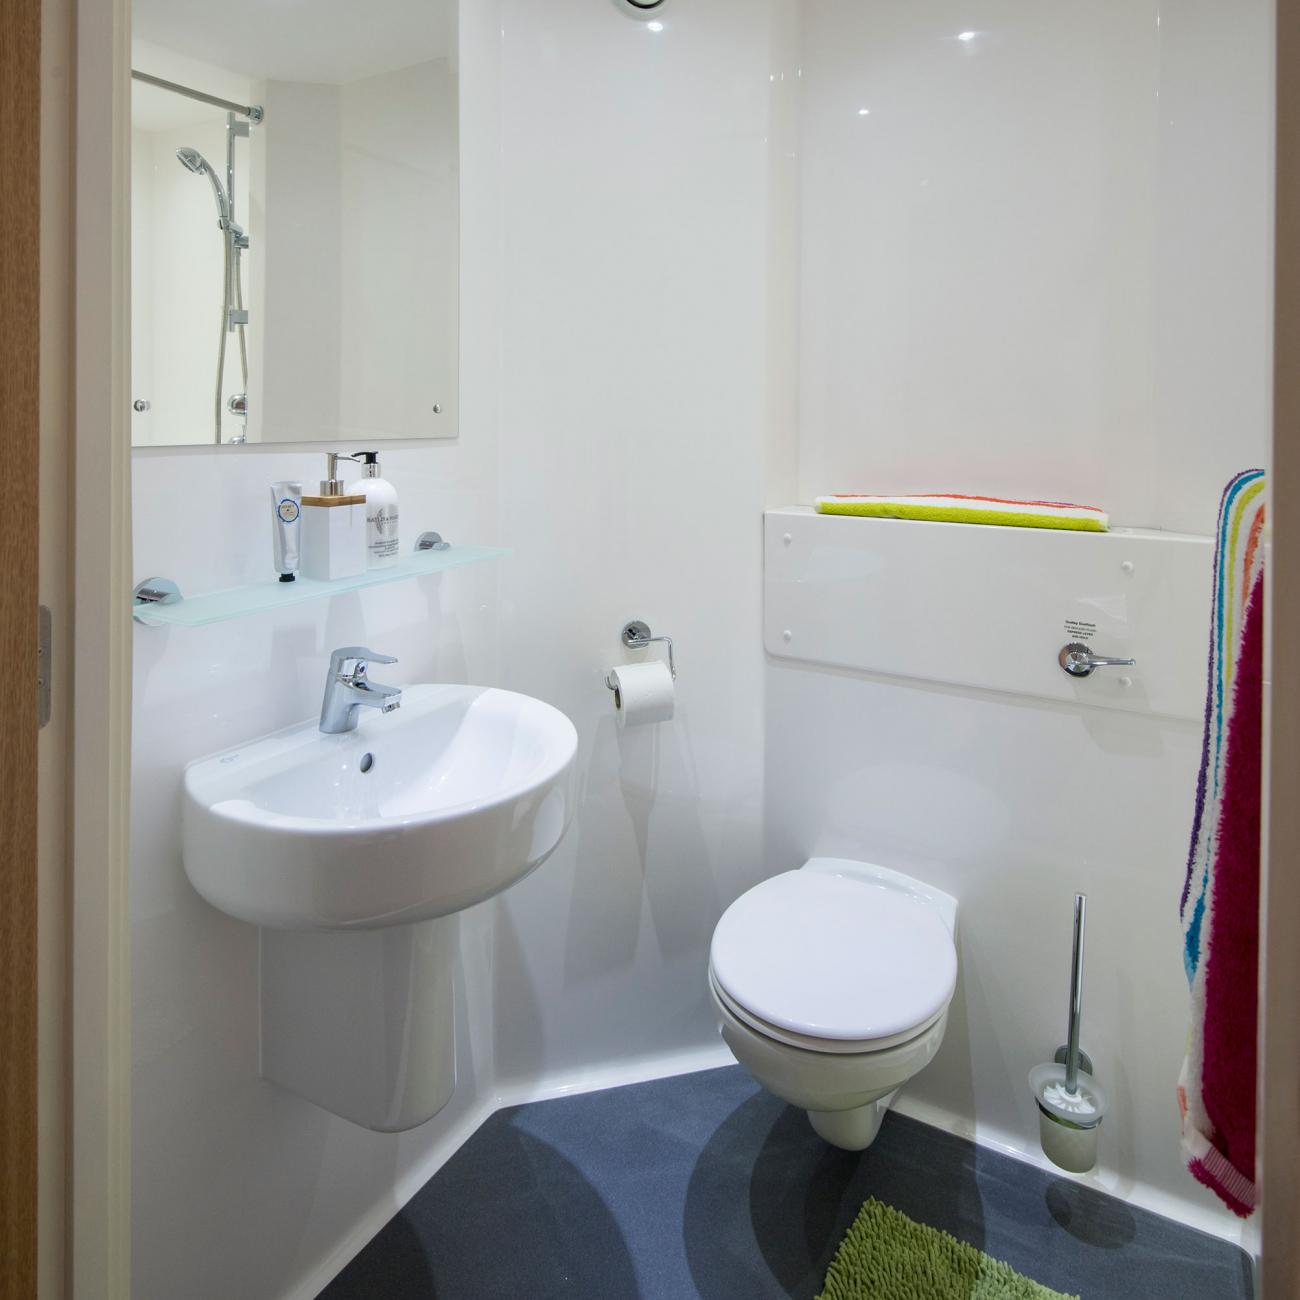 Toilet and wash basin with mirror in a bright, modern bathroom.